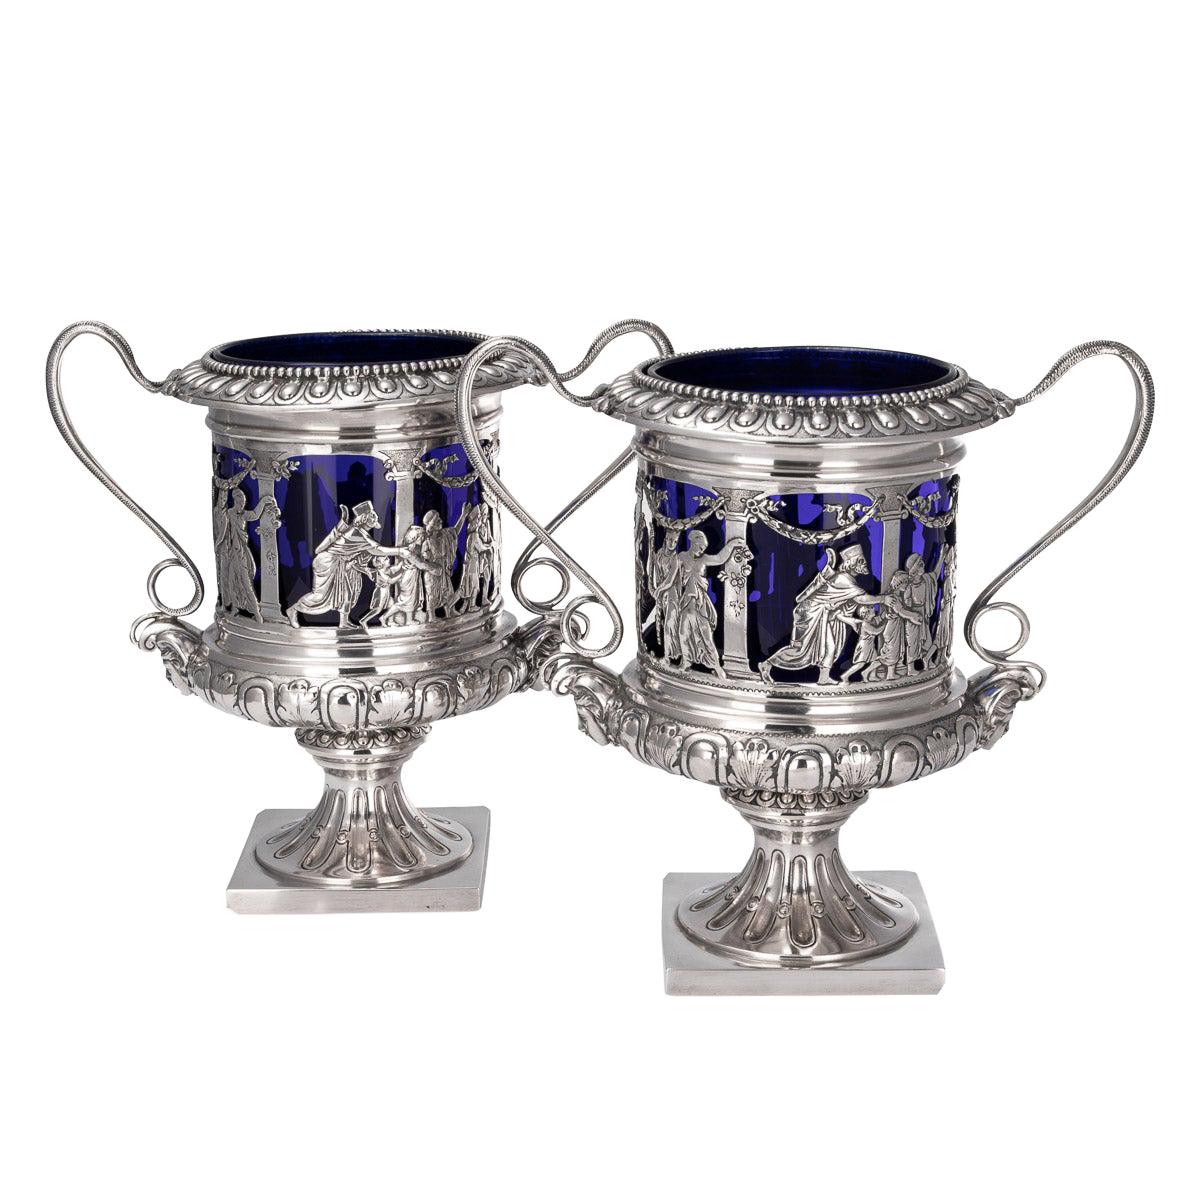 20th Century German Neo-Classical Solid Silver & Glass Wine Coolers, c.1900